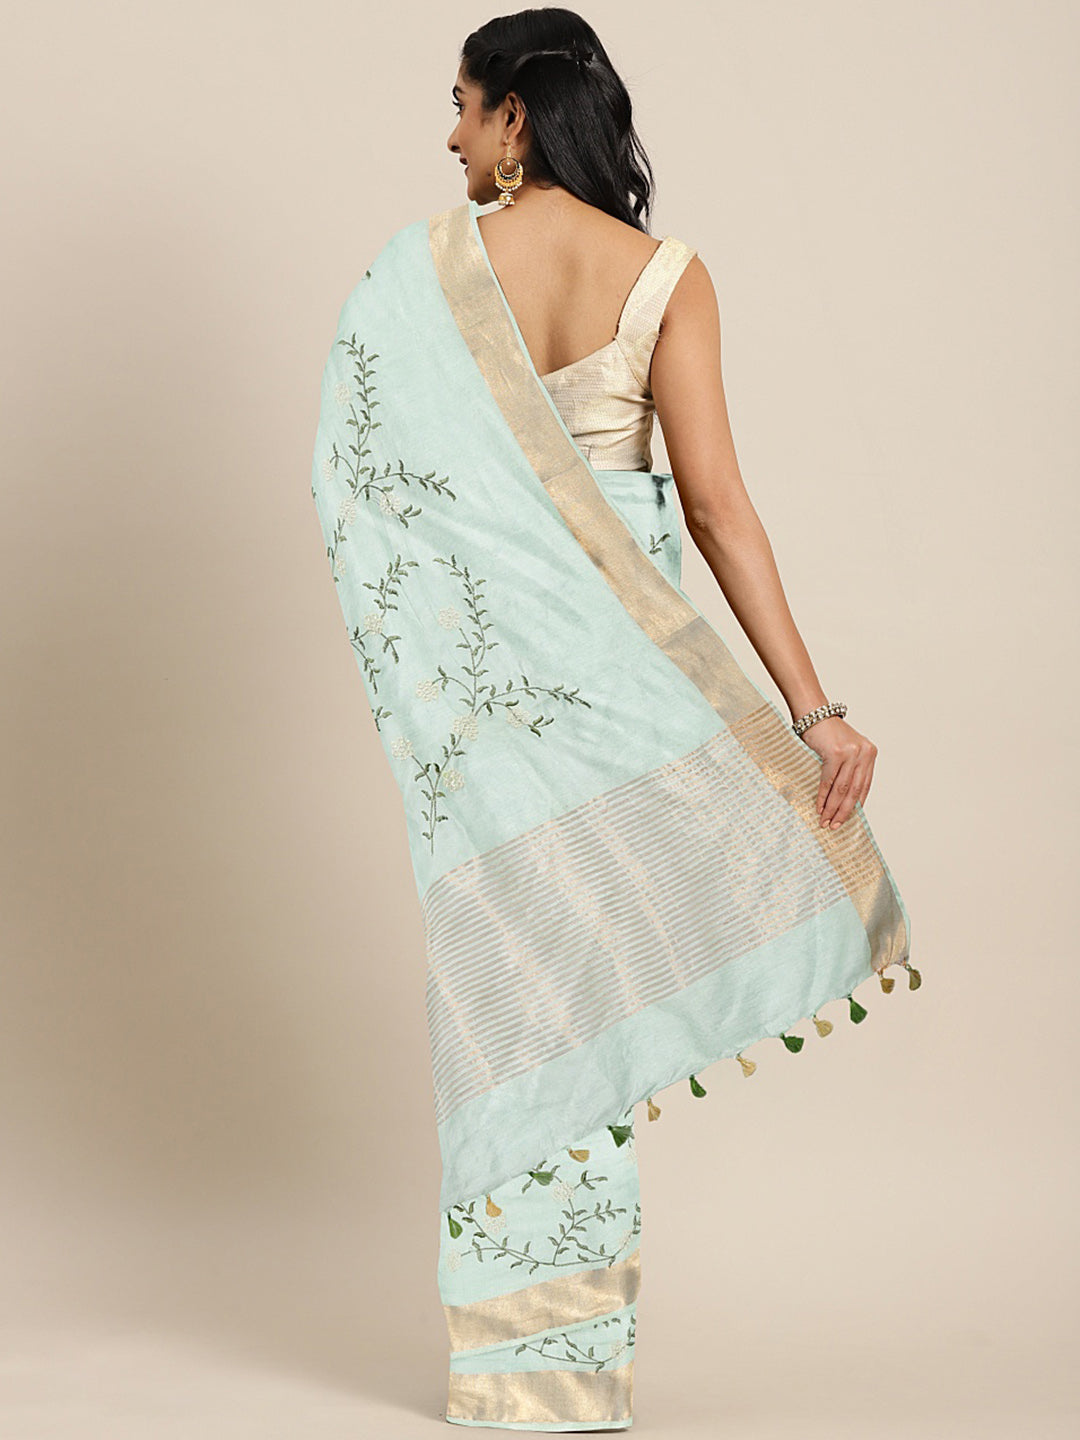 Kalakari India Kota Silk Embroidered Saree With Blouse ALBGSA0161-Saree-Kalakari India-ALBGSA0161-Geographical Indication, Hand Crafted, Heritage Prints, Linen, Natural Dyes, Pure Cotton, Sarees, Sustainable Fabrics, Woven-[Linen,Ethnic,wear,Fashionista,Handloom,Handicraft,Indigo,blockprint,block,print,Cotton,Chanderi,Blue, latest,classy,party,bollywood,trendy,summer,style,traditional,formal,elegant,unique,style,hand,block,print, dabu,booti,gift,present,glamorous,affordable,collectible,Sari,Sare